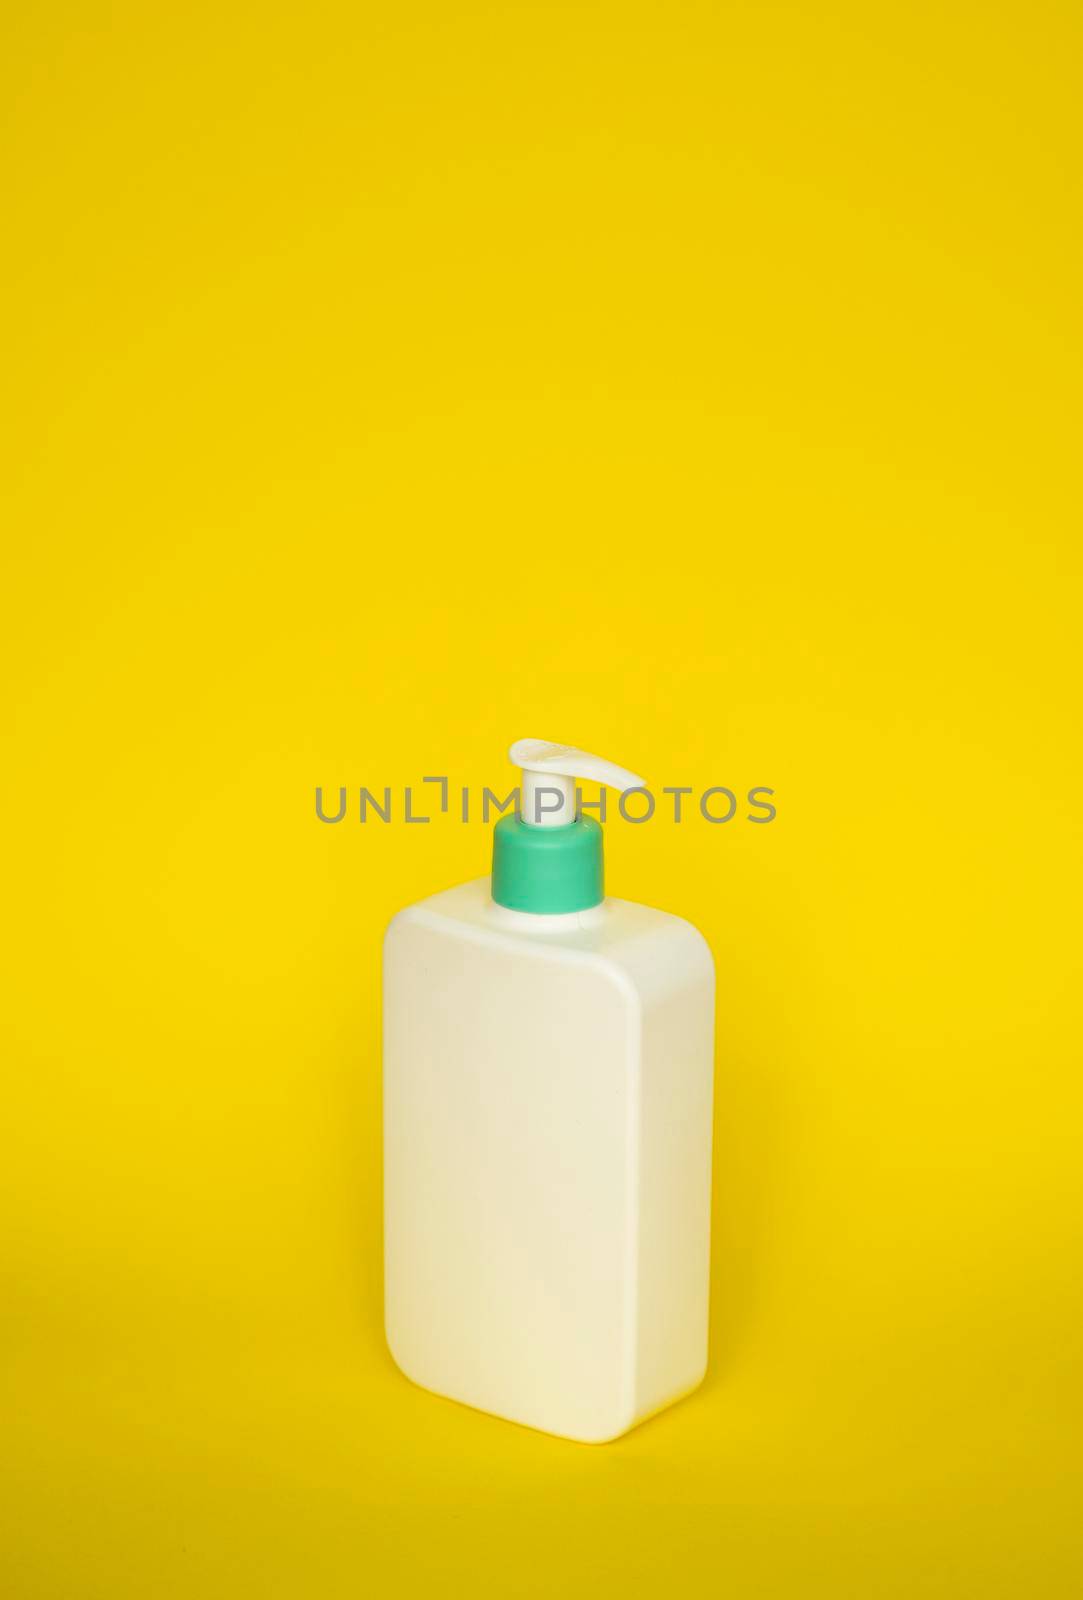 Shampoo or hair conditioner bottle with dispenser pump on yellow background